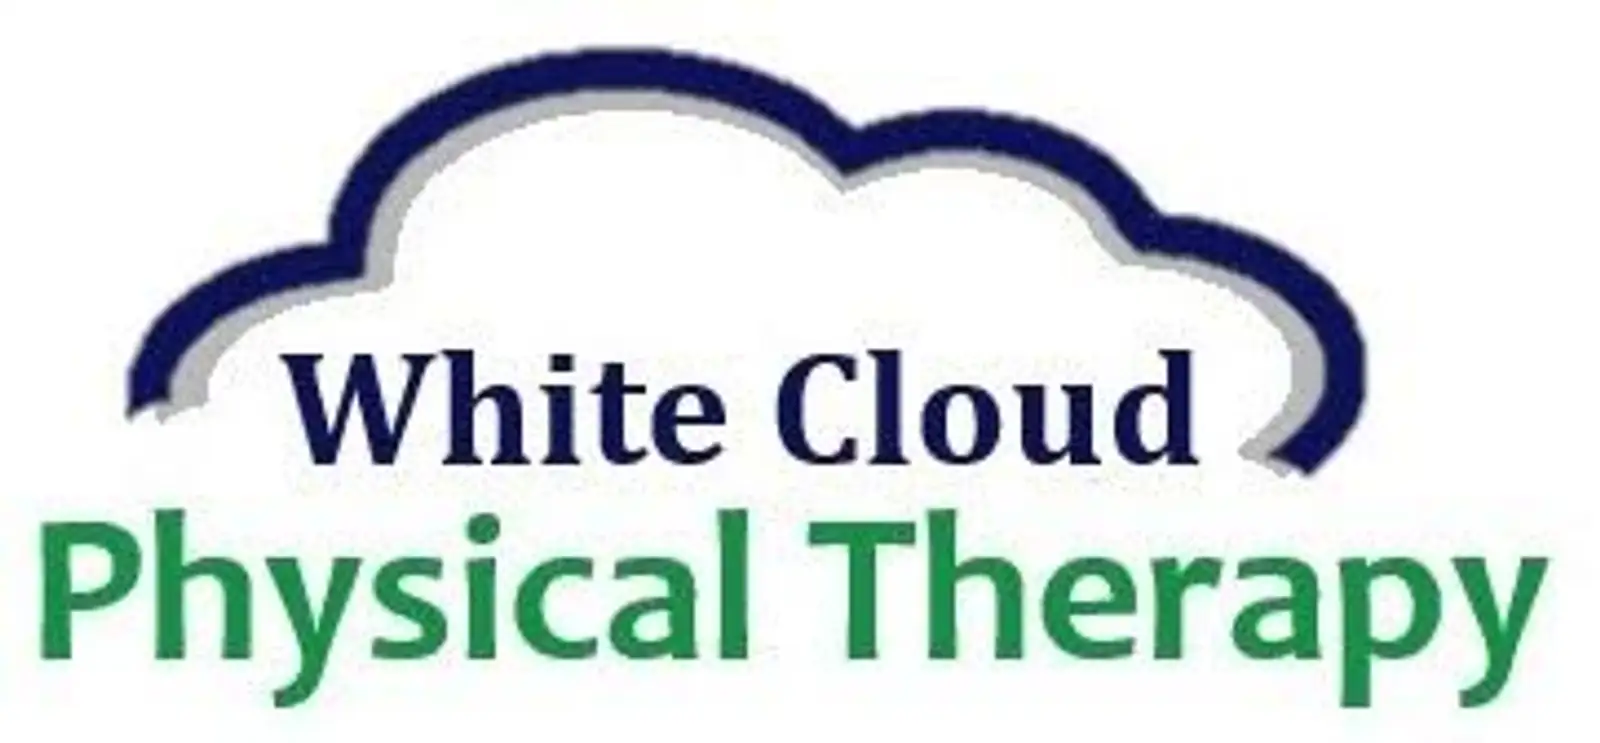 White Cloud Physical Therapy  logo